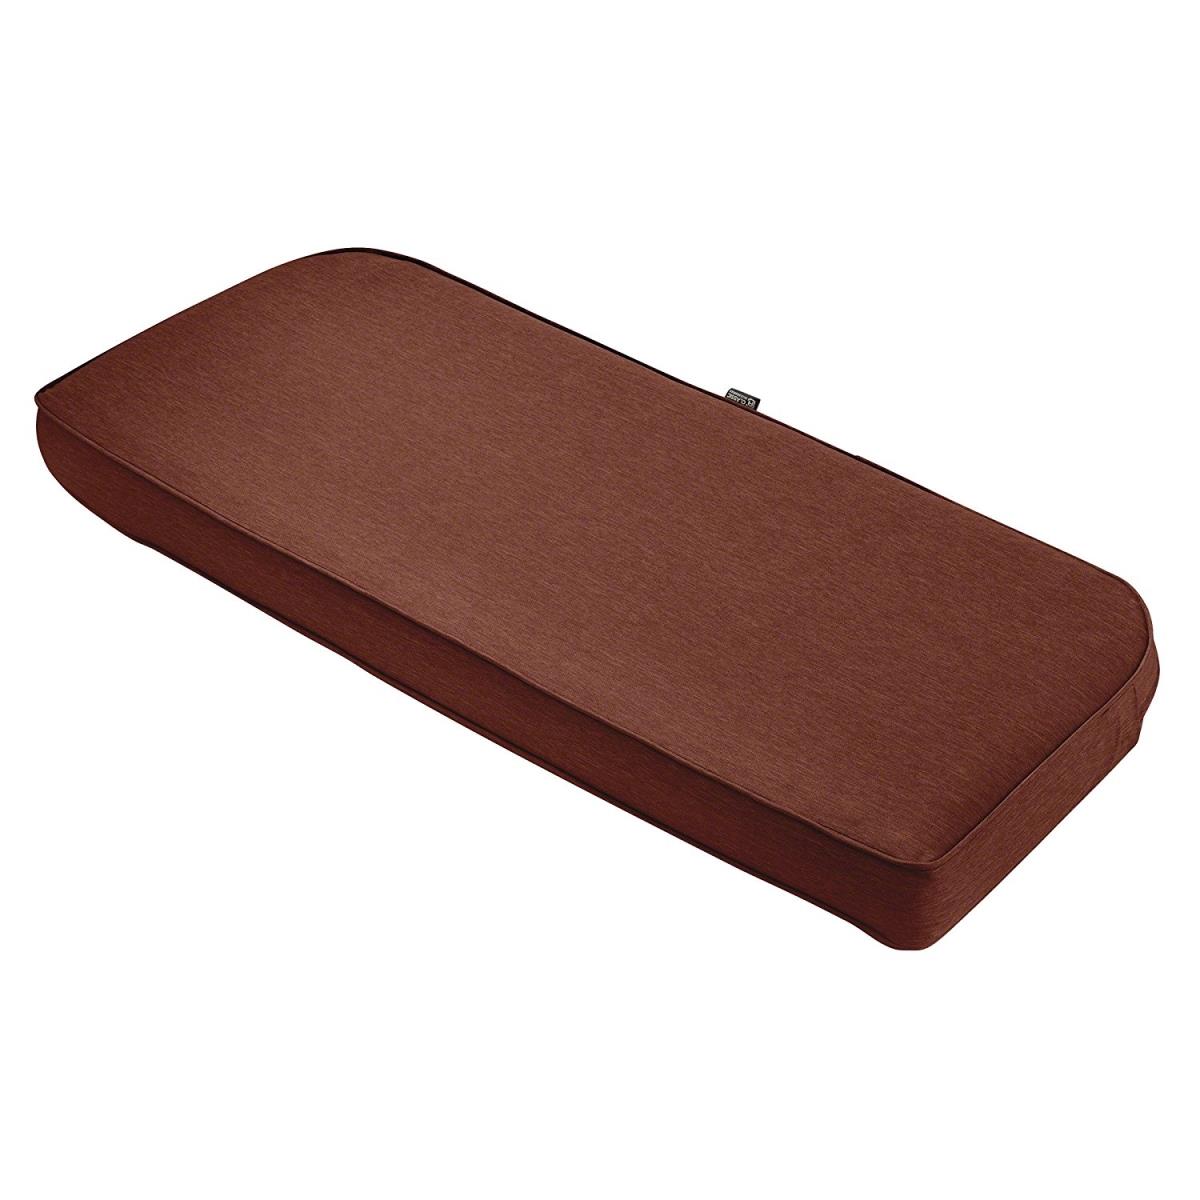 Picture of Classic Accessories 62-016-HHENNA-EC Montlake Bench Contoured Cushion Foam And Slip Cover, Heather Henna - 41 x 18 x 3 in.